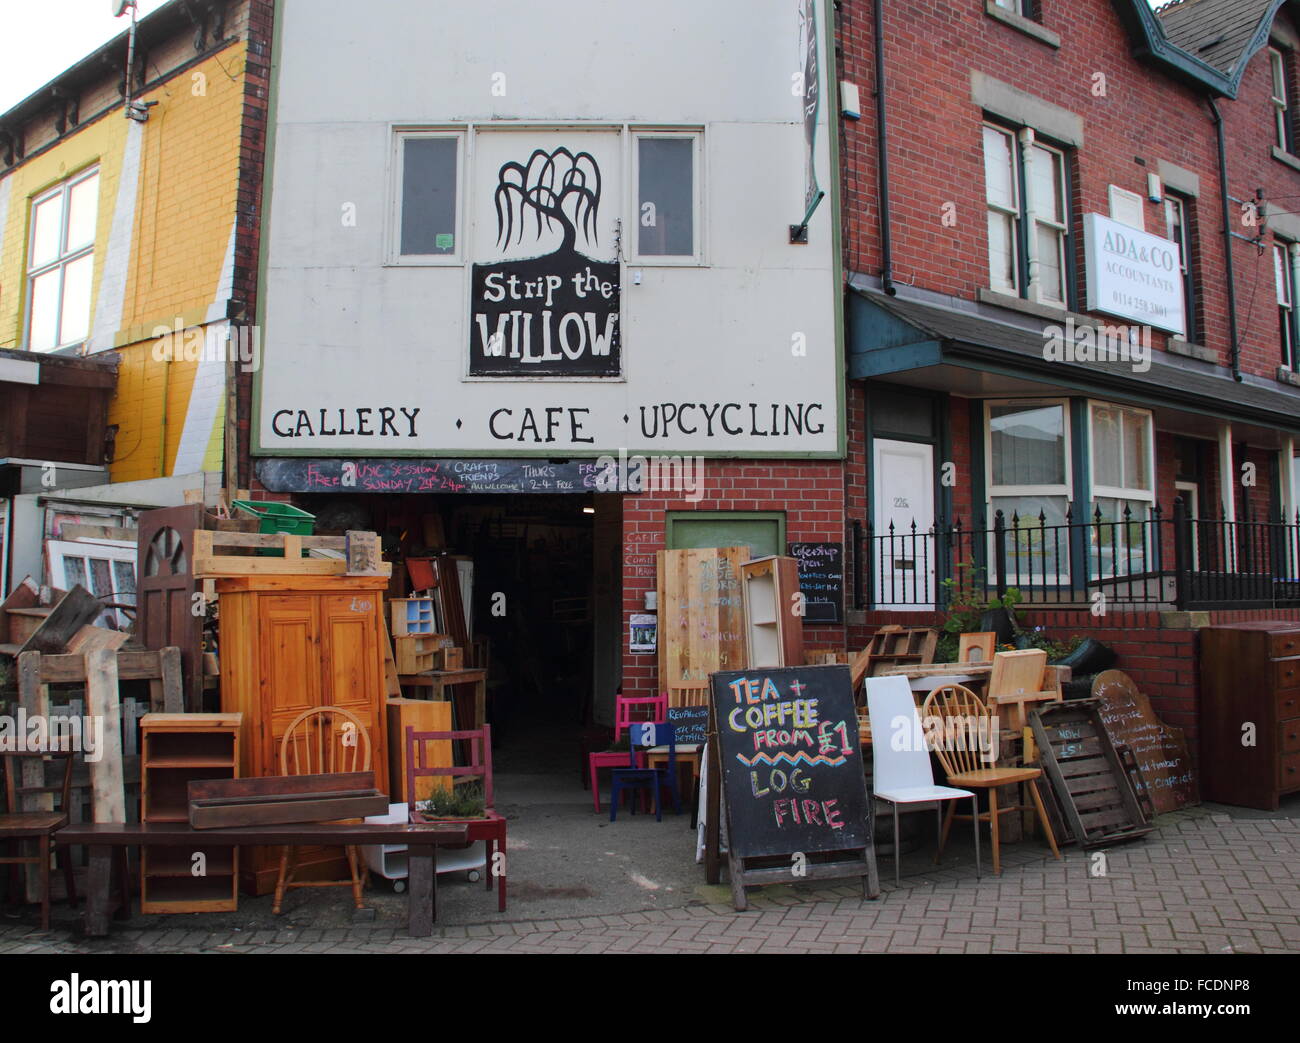 Strip the Willow, a social enterprise featuring a gallery, cafe and upcycling space in Sheffield, South Yorkshire Englland UK Stock Photo